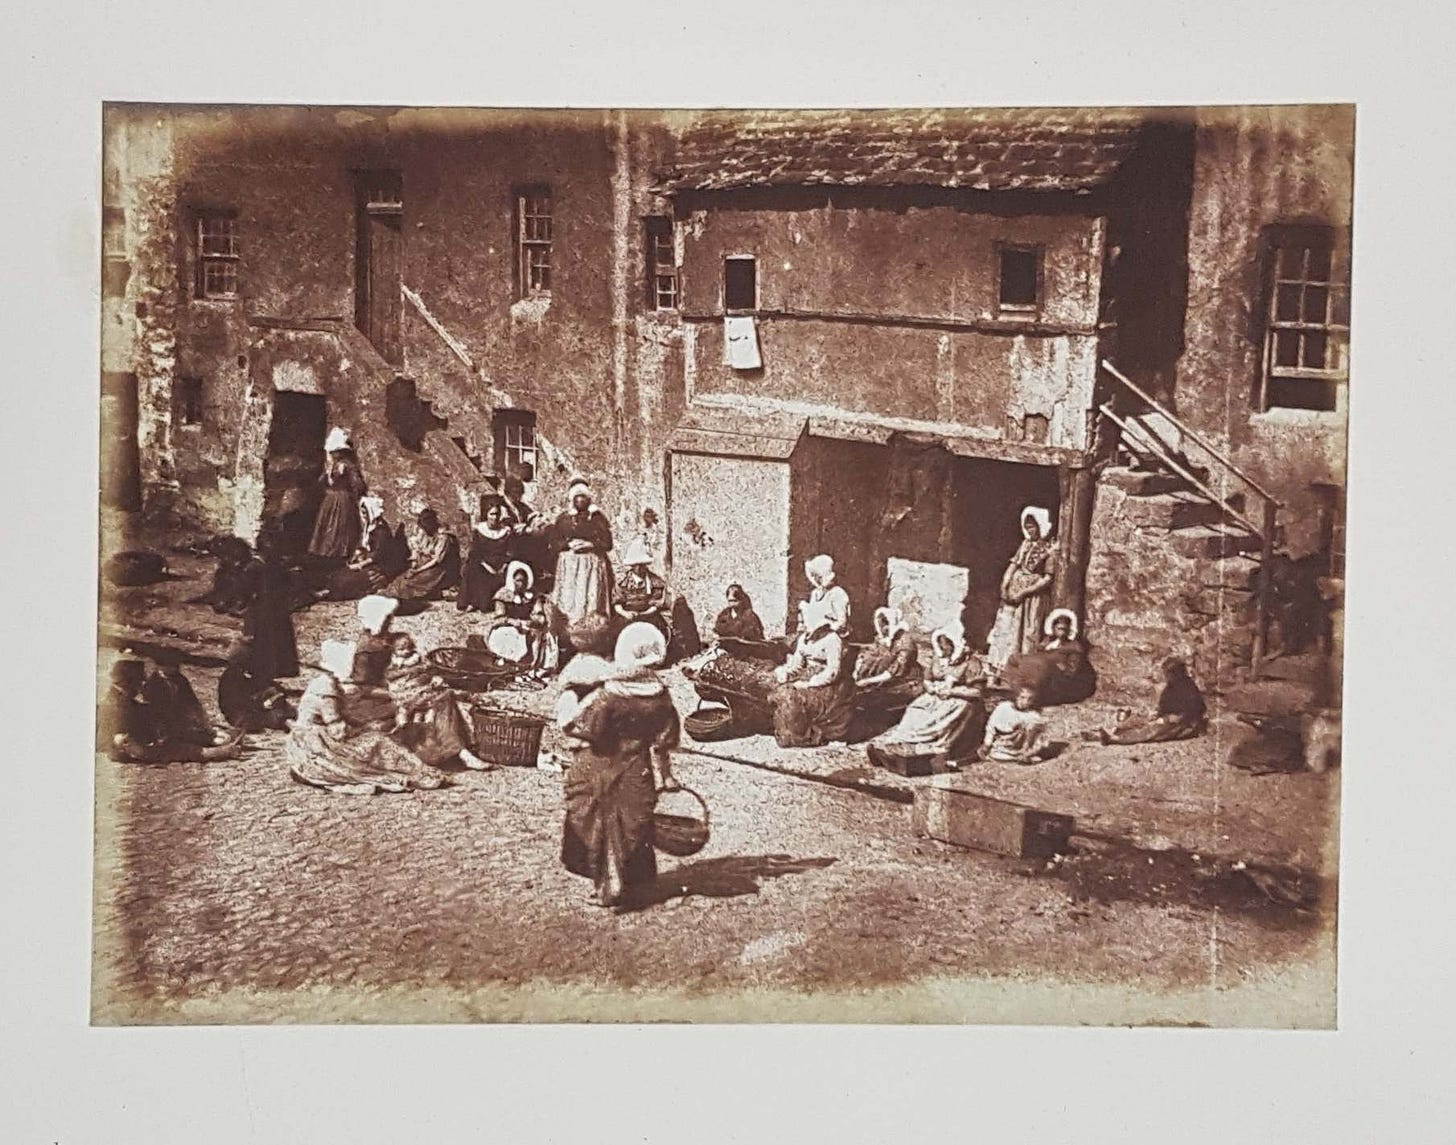 Photographic print showing women seated in front of houses preparing fishing lines. A woman holding a baby approaches them.